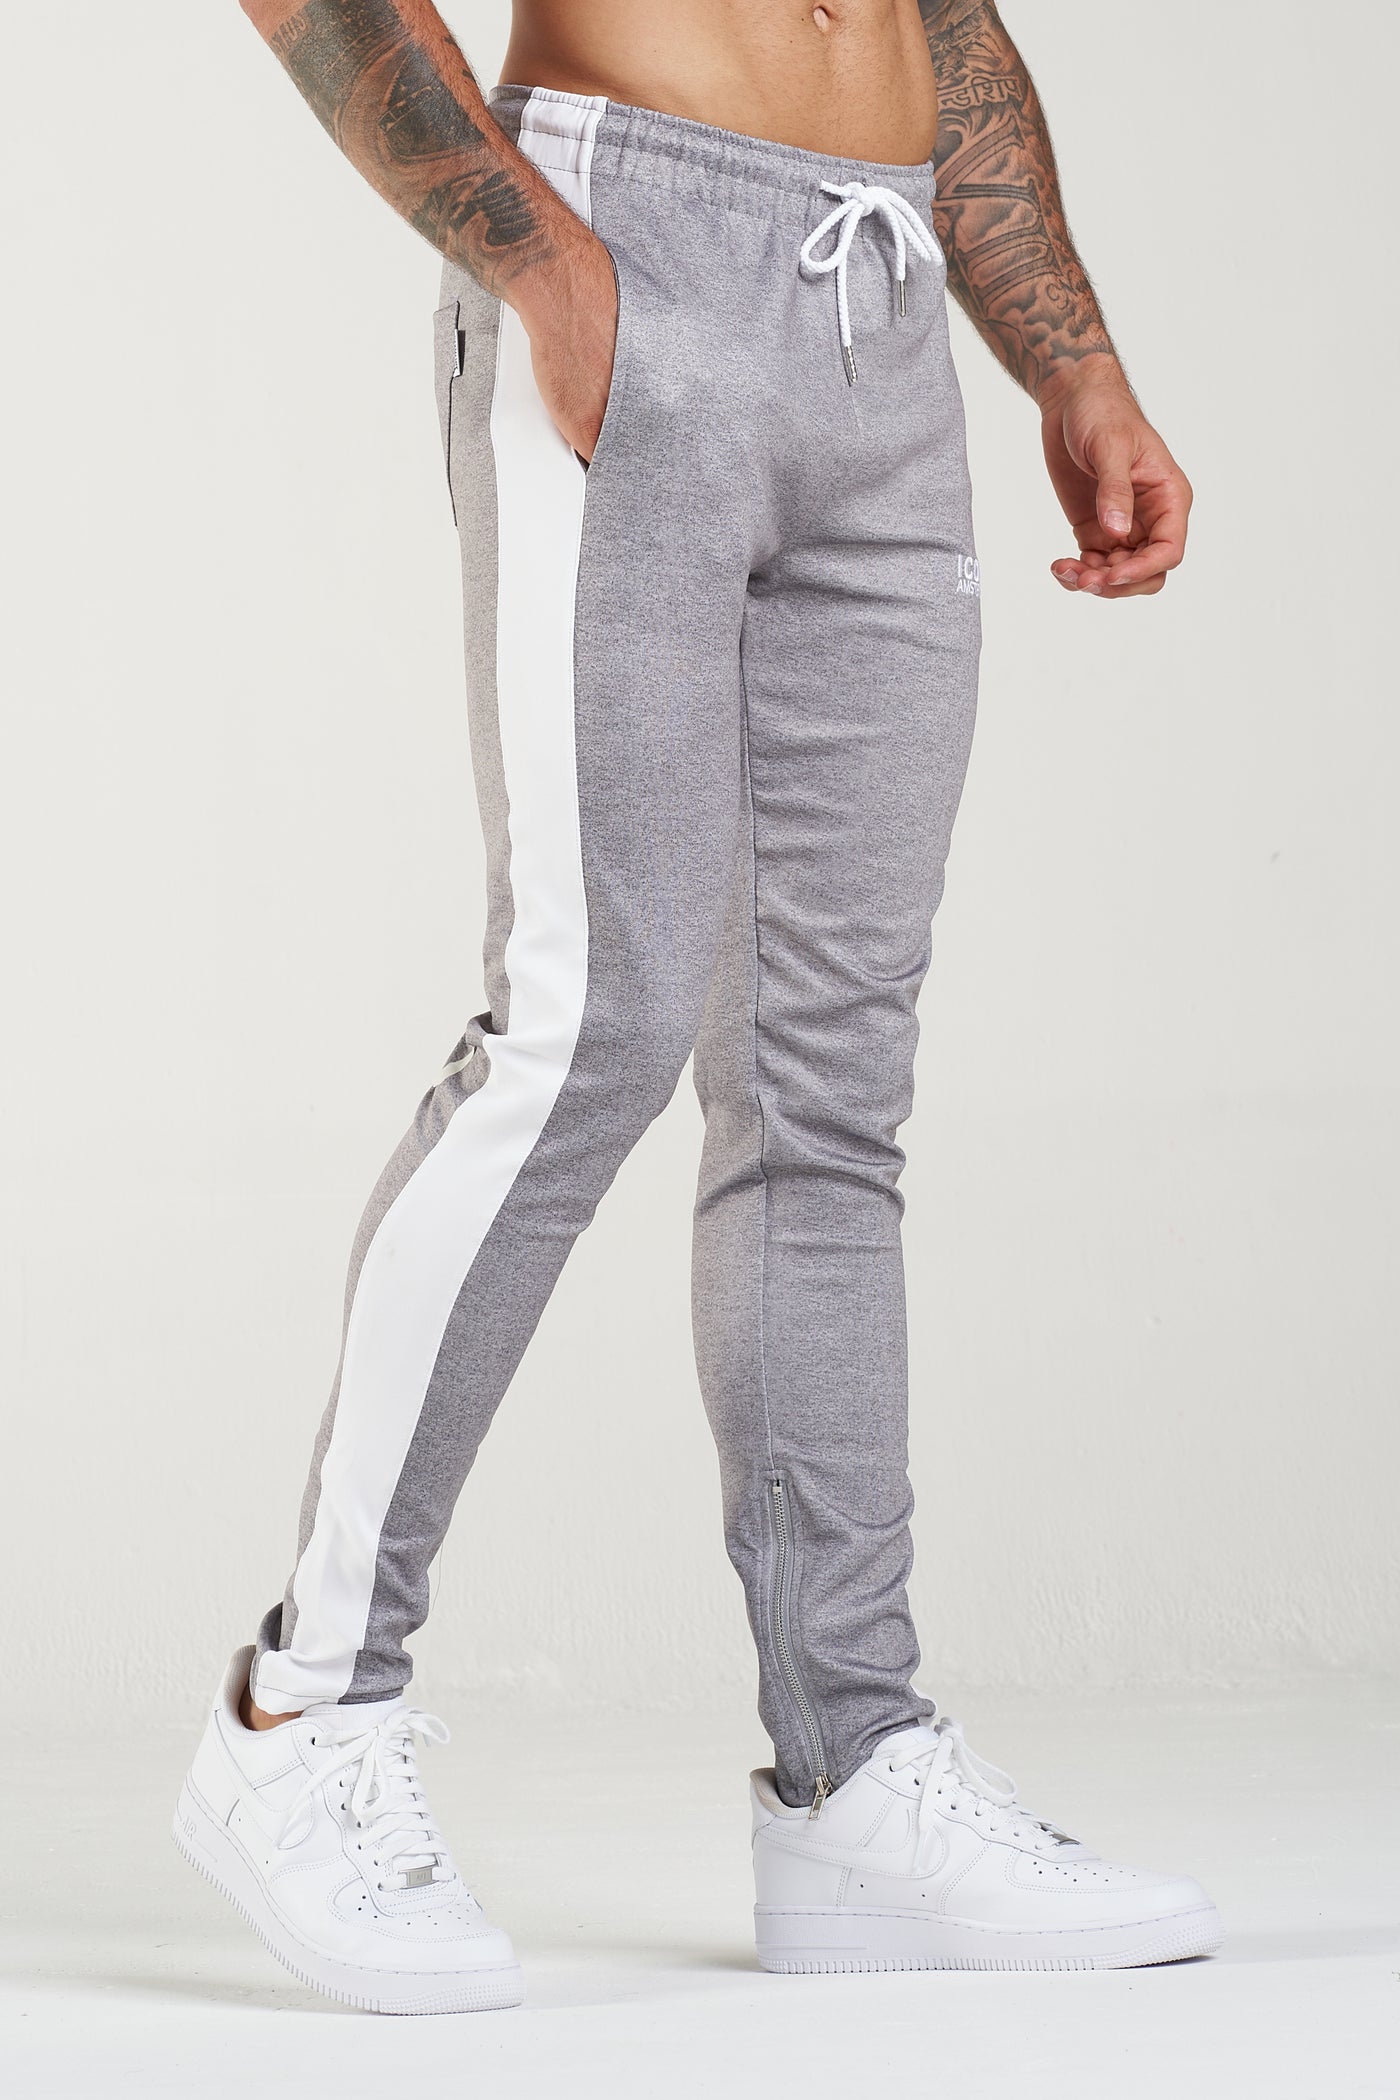 THE ICONIC TRACK PANTS - GREY  Pants, Track pants, Well dressed men